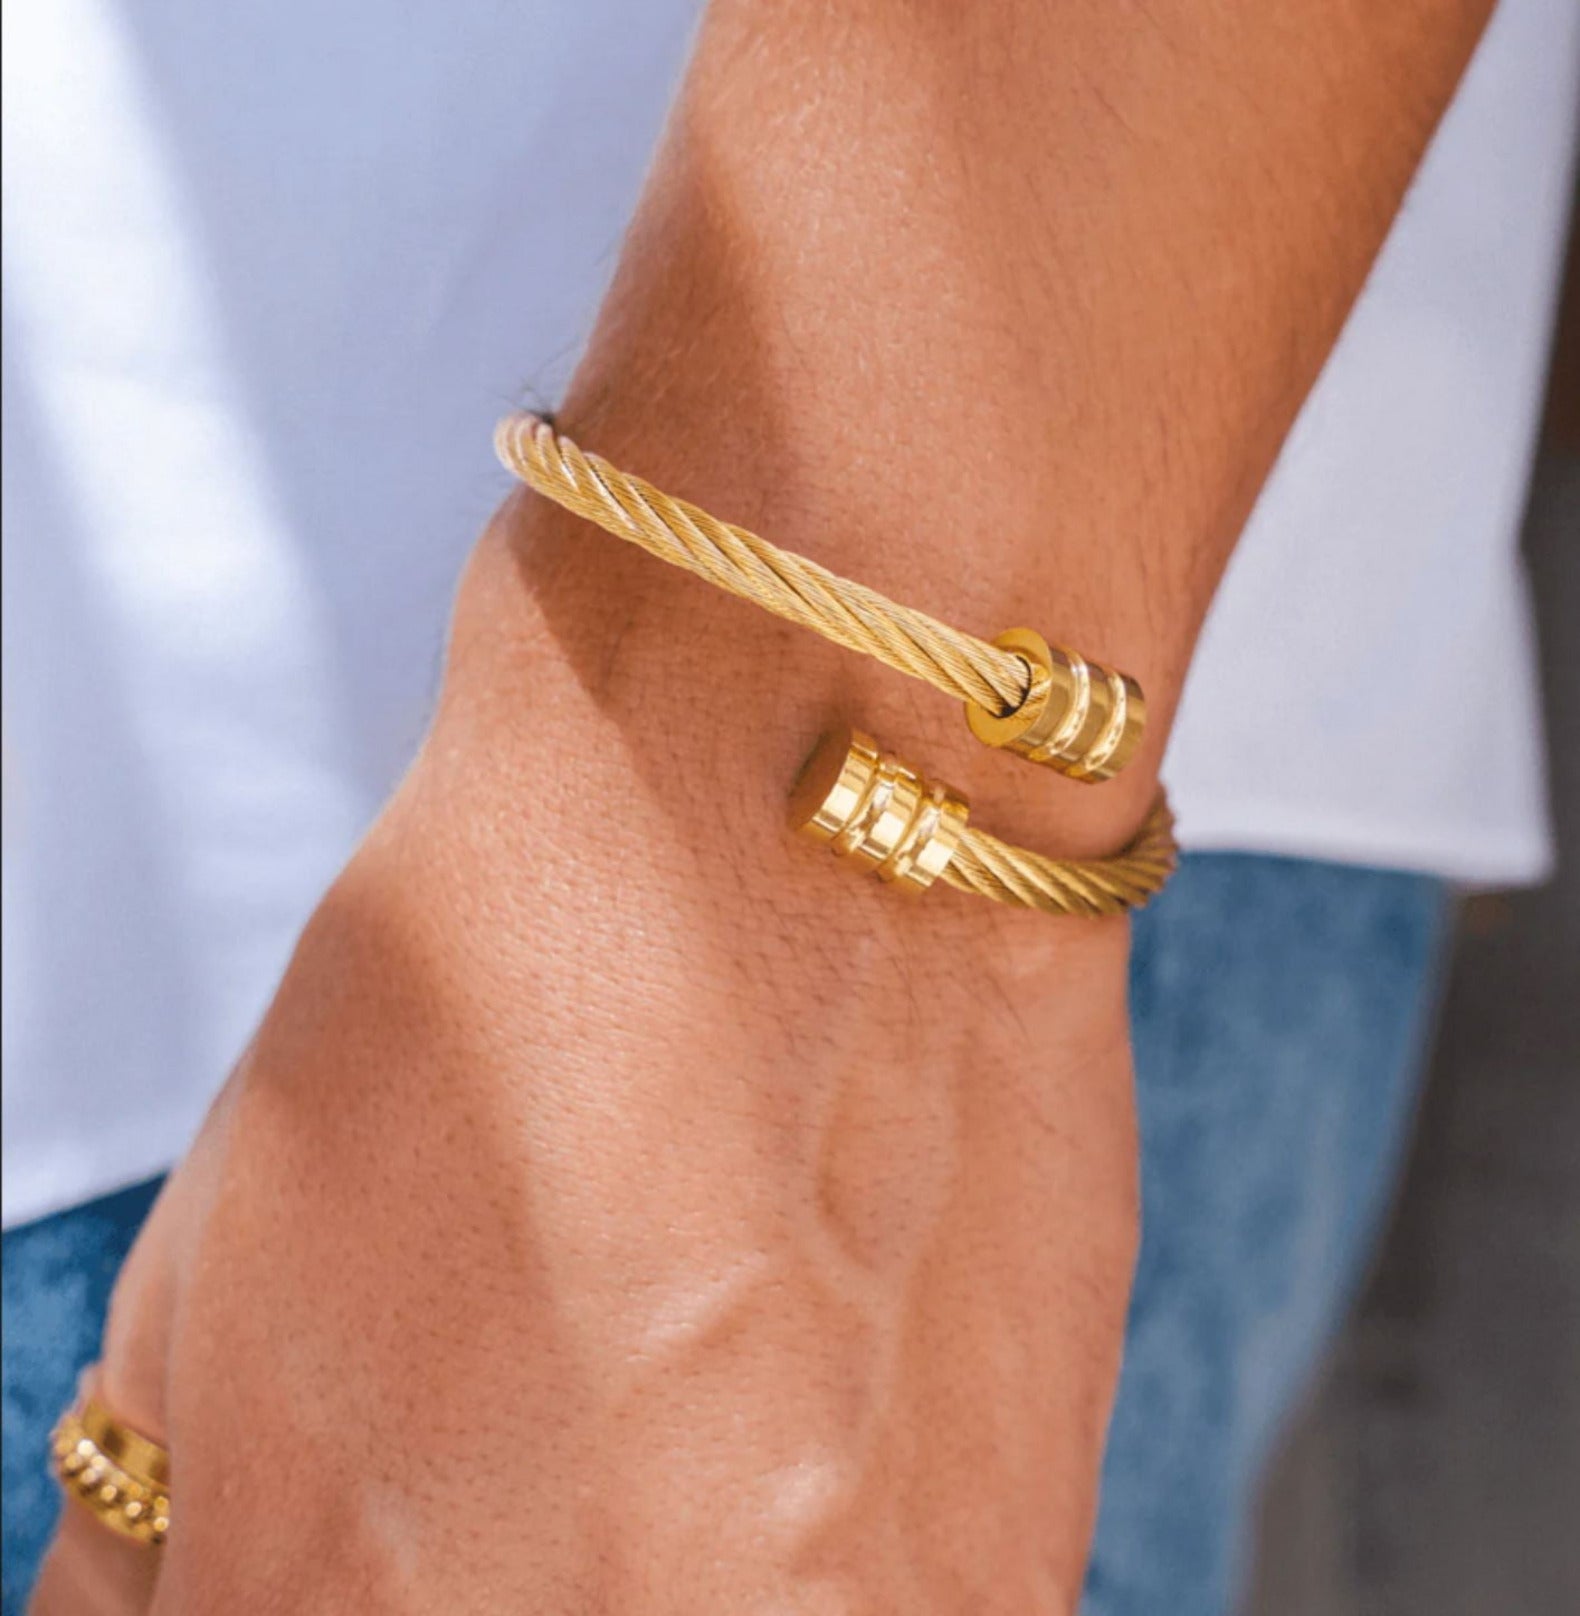 TWISTER BANGLE BRACELET - GOLD ring Yubama Jewelry Online Store - The Elegant Designs of Gold and Silver ! 